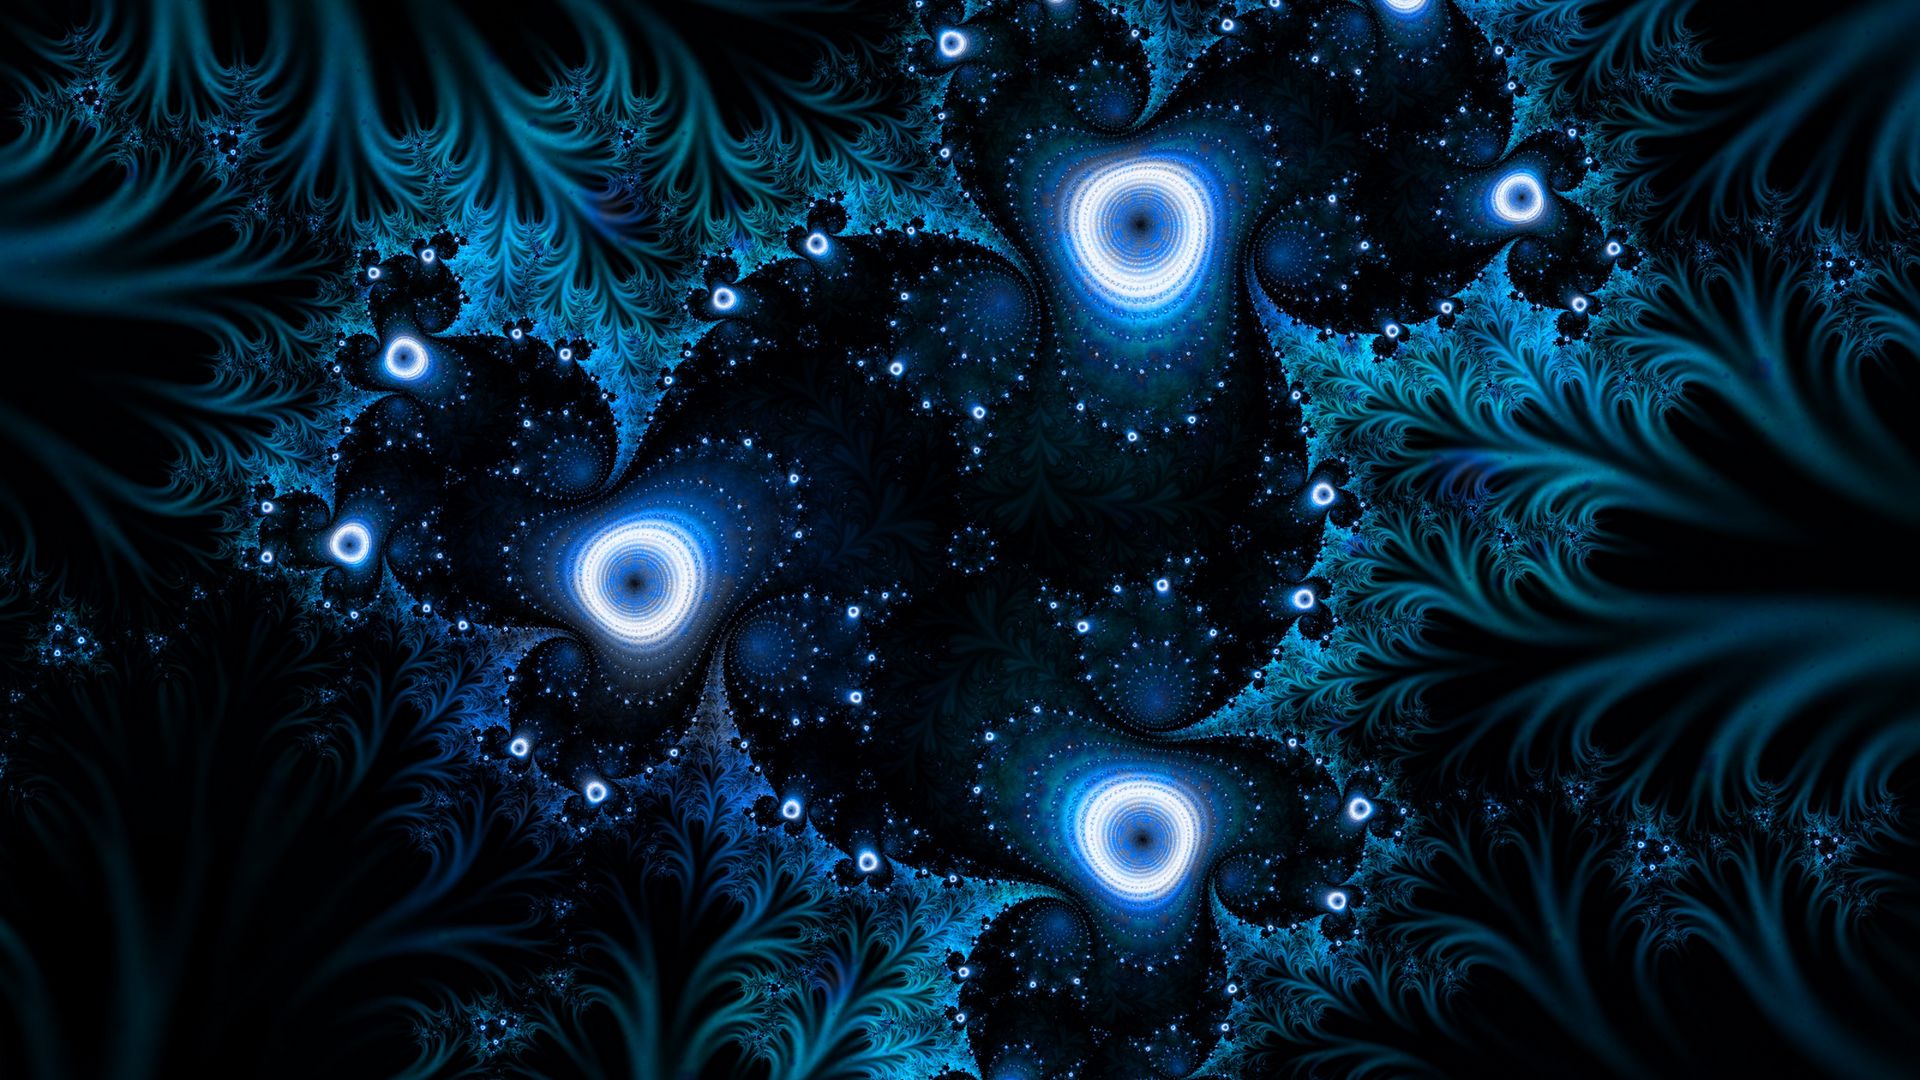 Download wallpaper 1920x1080 fractal, tangled, dark, glow, abstraction full  hd, hdtv, fhd, 1080p hd background